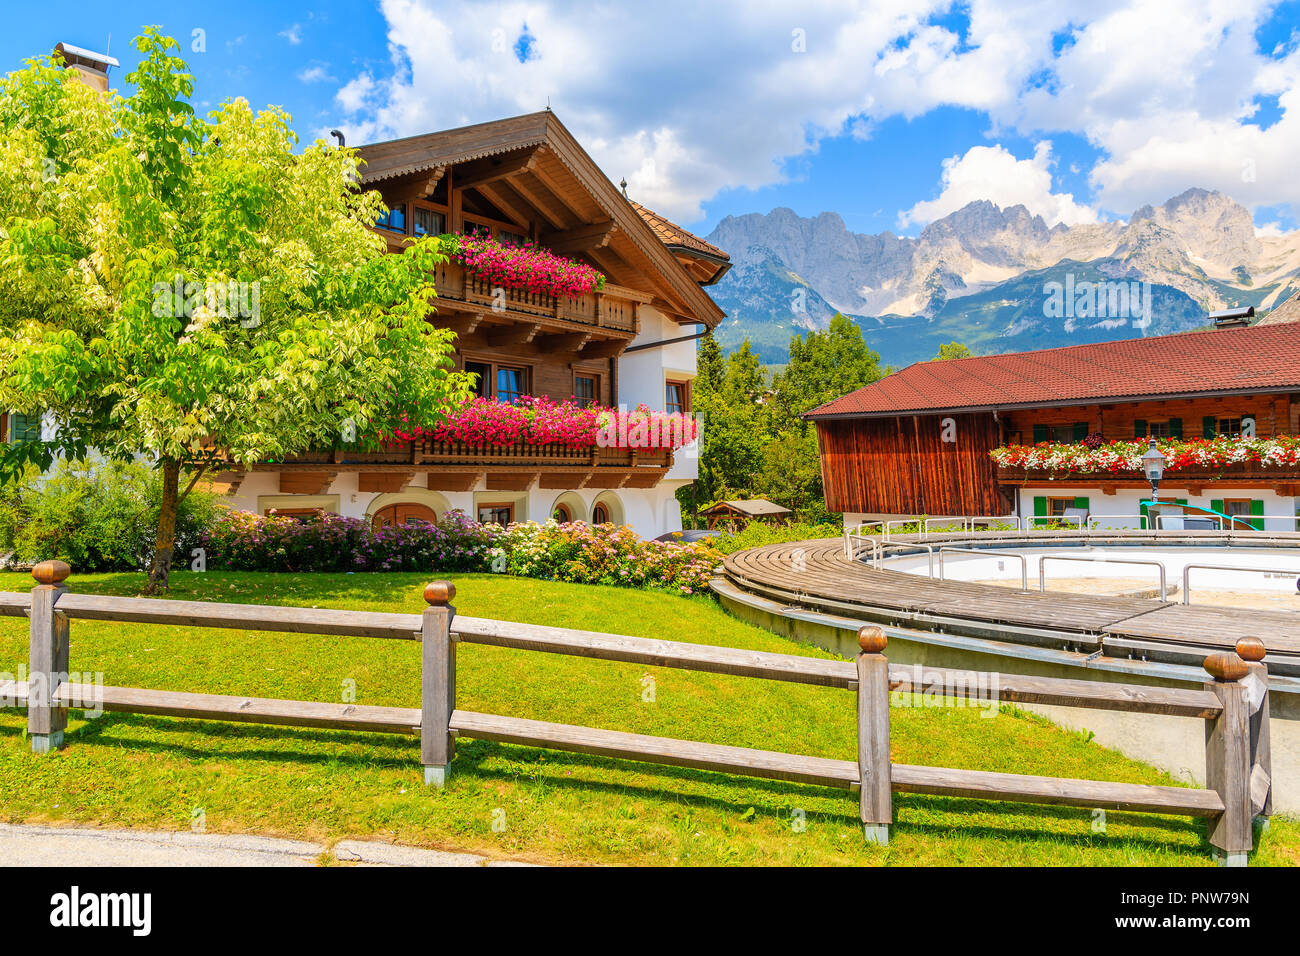 Typical wooden alpine house decorated with flowers on green meadow in Going am Wilden Kaiser village on sunny summer day, Tyrol, Austria Stock Photo